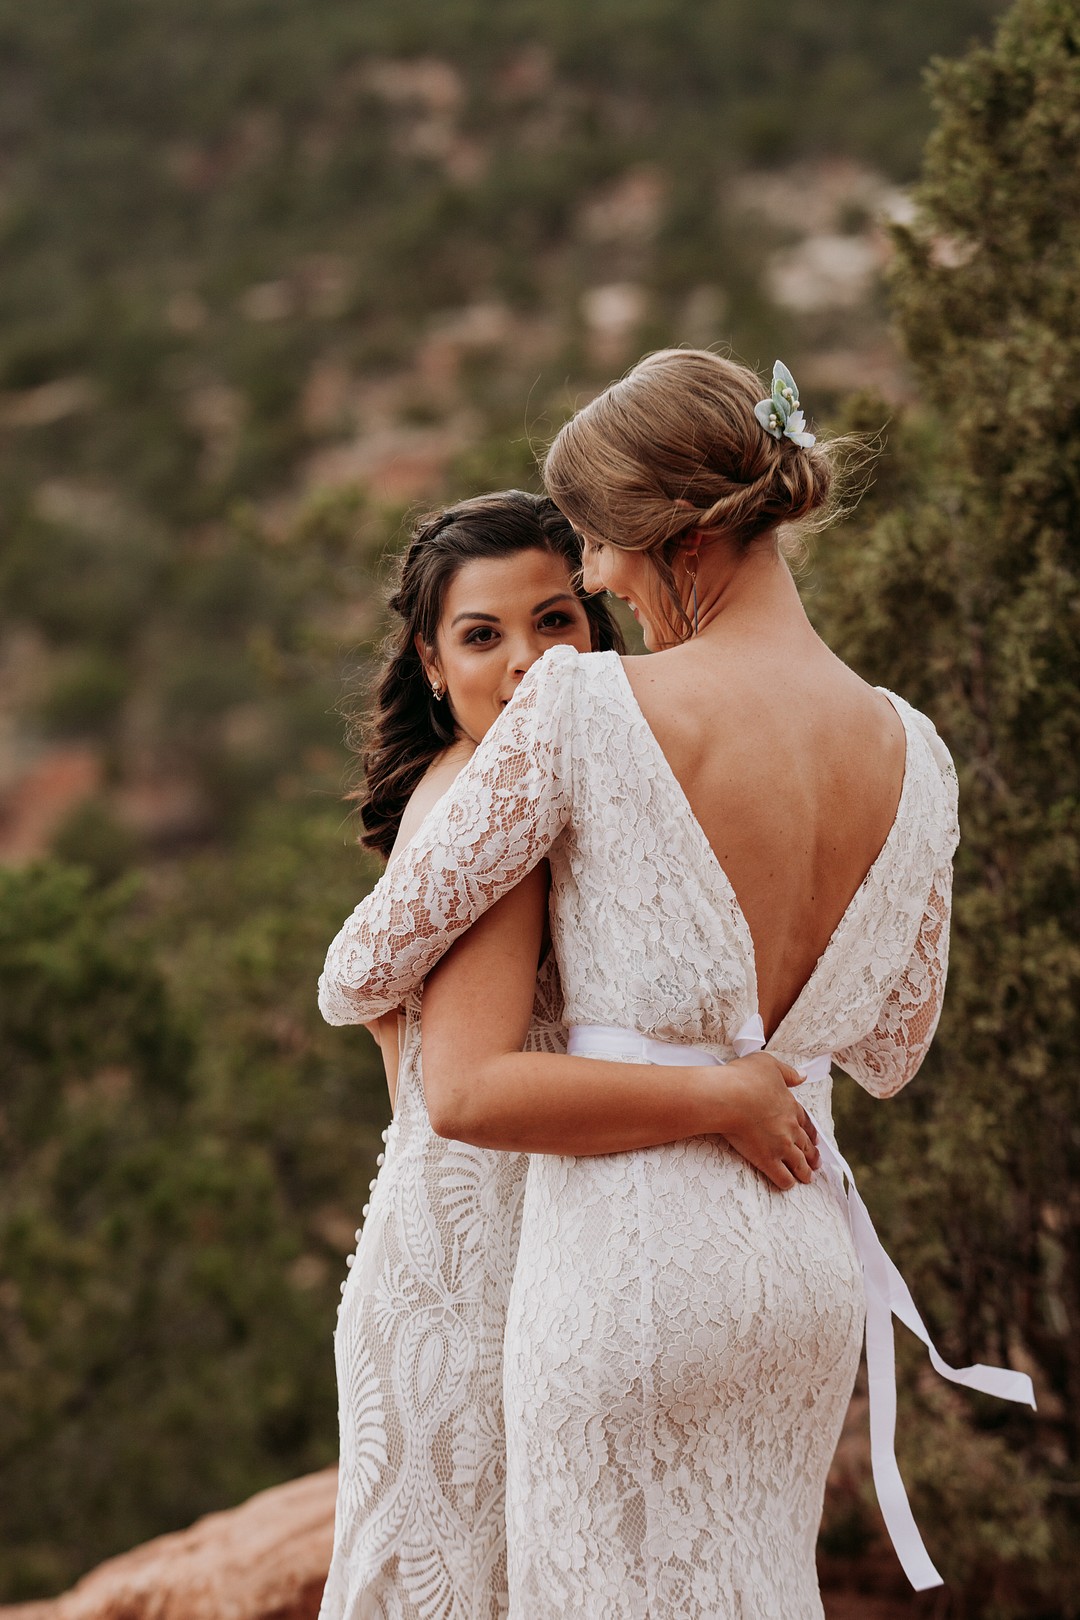 Epic spring Garden of the Gods elopement with dog attendants LGBTQ+ weddings intimate lesbian wedding two brides dogs sandstone formation cliffs